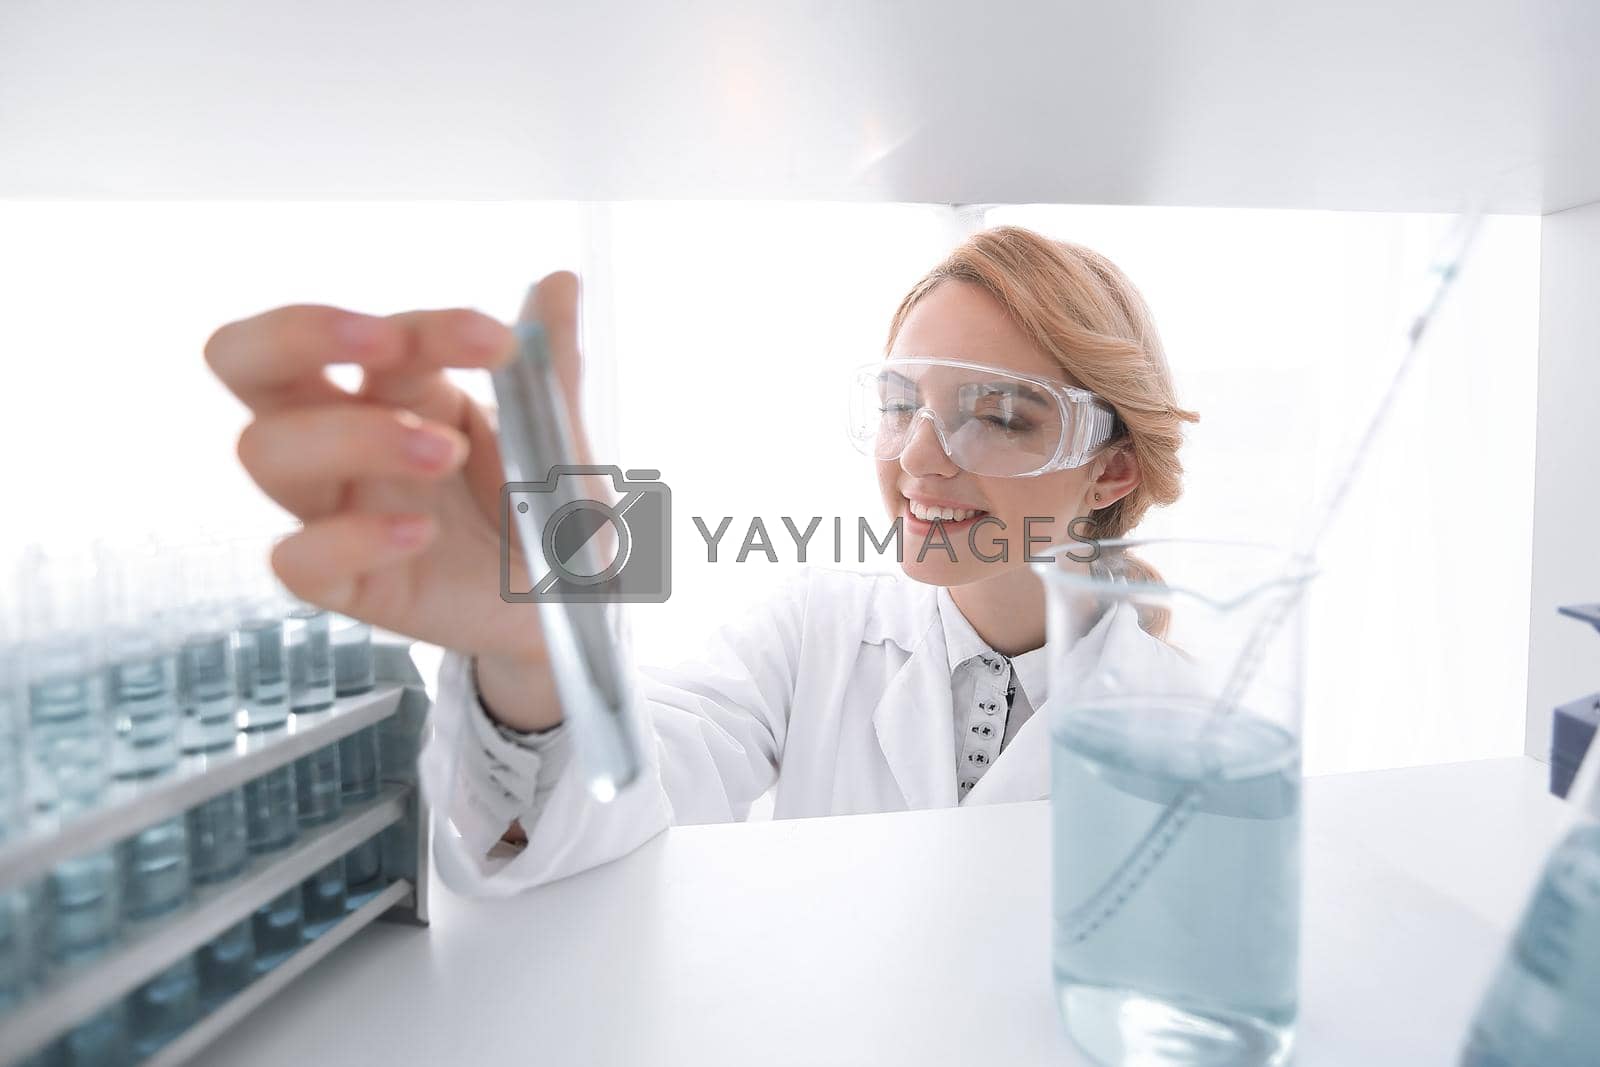 Royalty free image of closeup.portrait of doctor biologist in the lab. by asdf